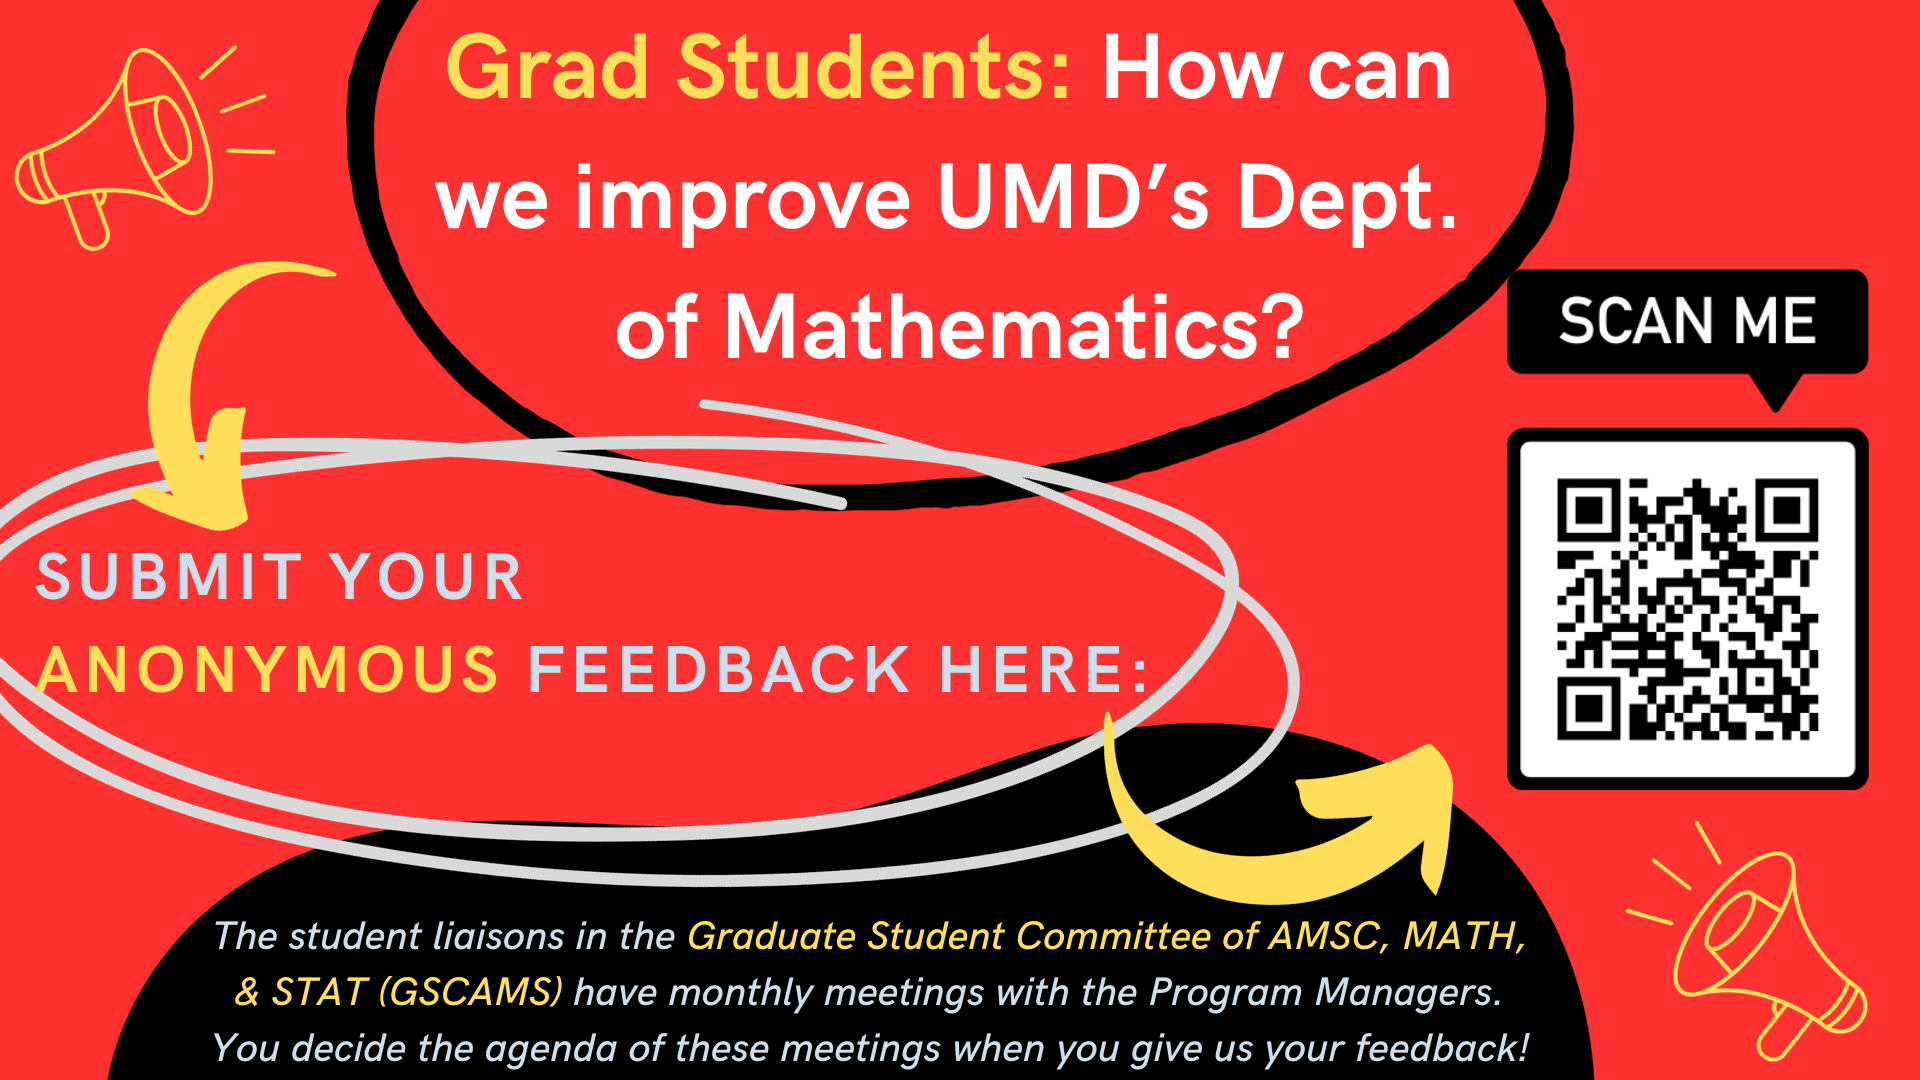 Image encouraging grad students to submit their anonymous feedback using the student survey feedback link.